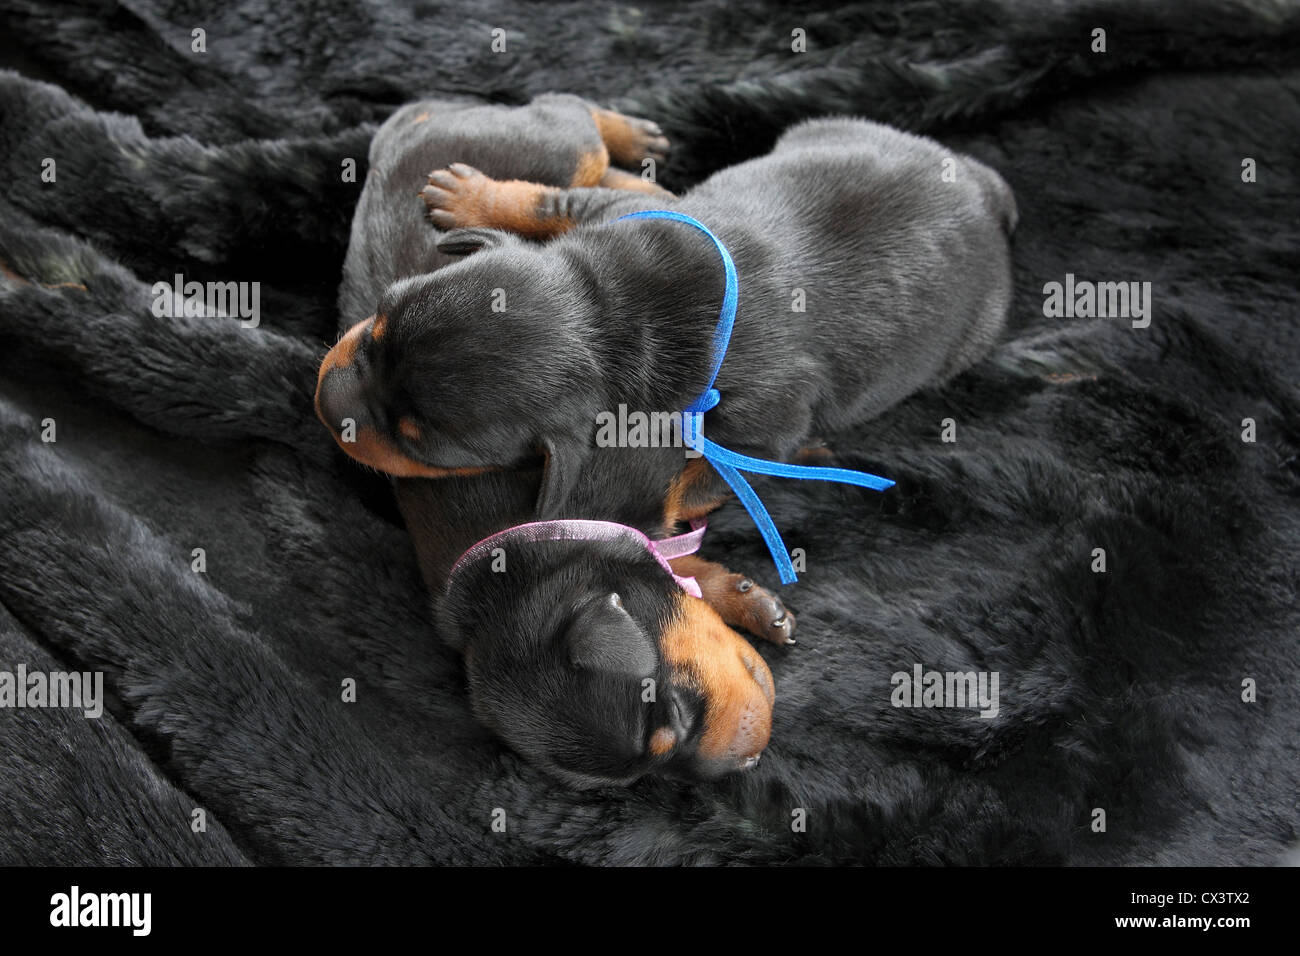 The Miniature Pinscher puppies, 5 days old Stock Photo